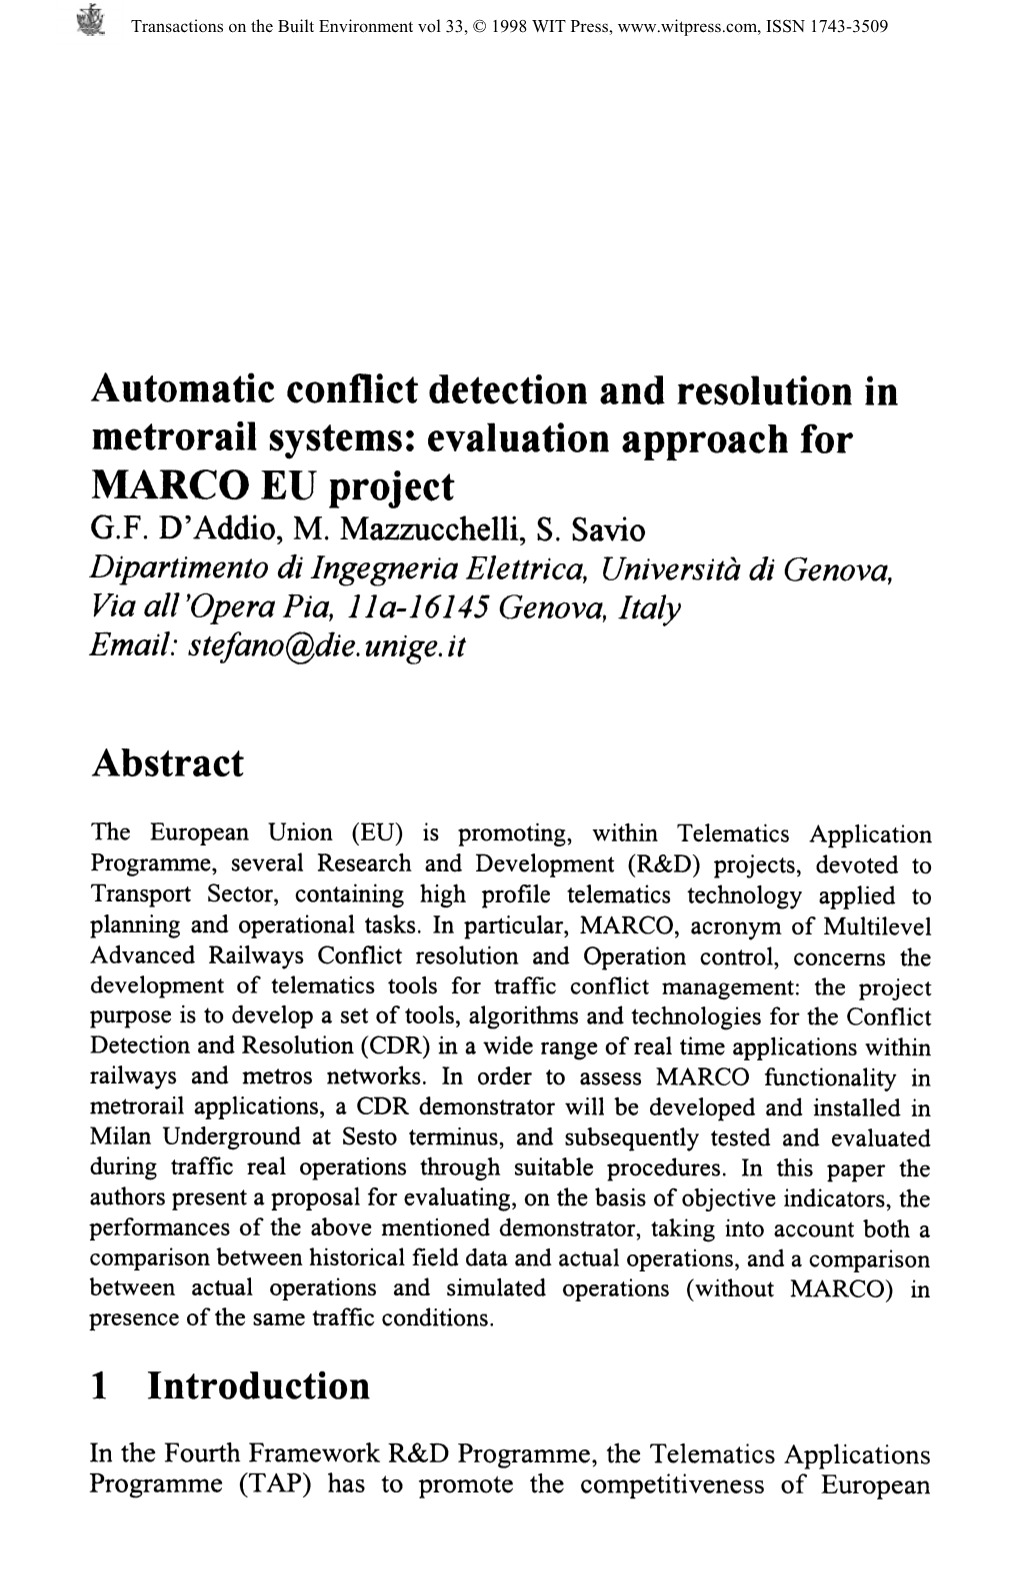 Automatic Conflict Detection and Resolution in Metrorail Systems: Evaluation Approach For